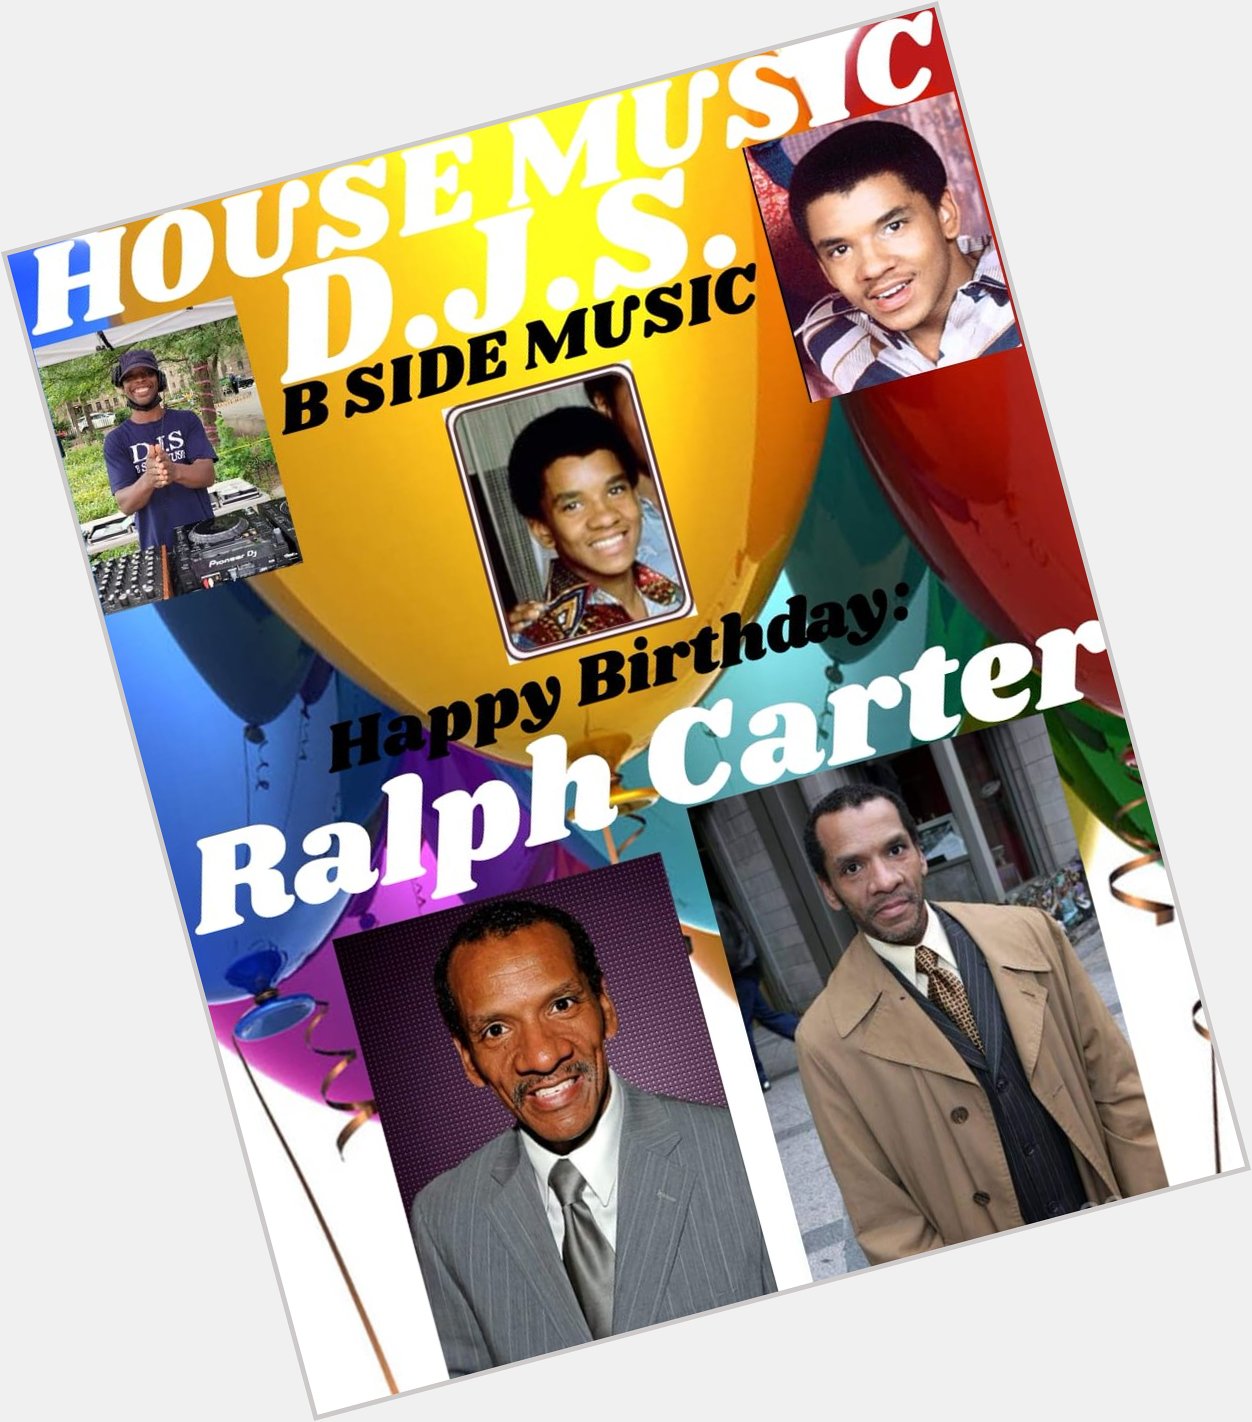 I(D.J.S.)\"B SIDE MUSIC\" saying Happy Birthday to ICON ACTOR: \"RALPH CARTER\"!!! 